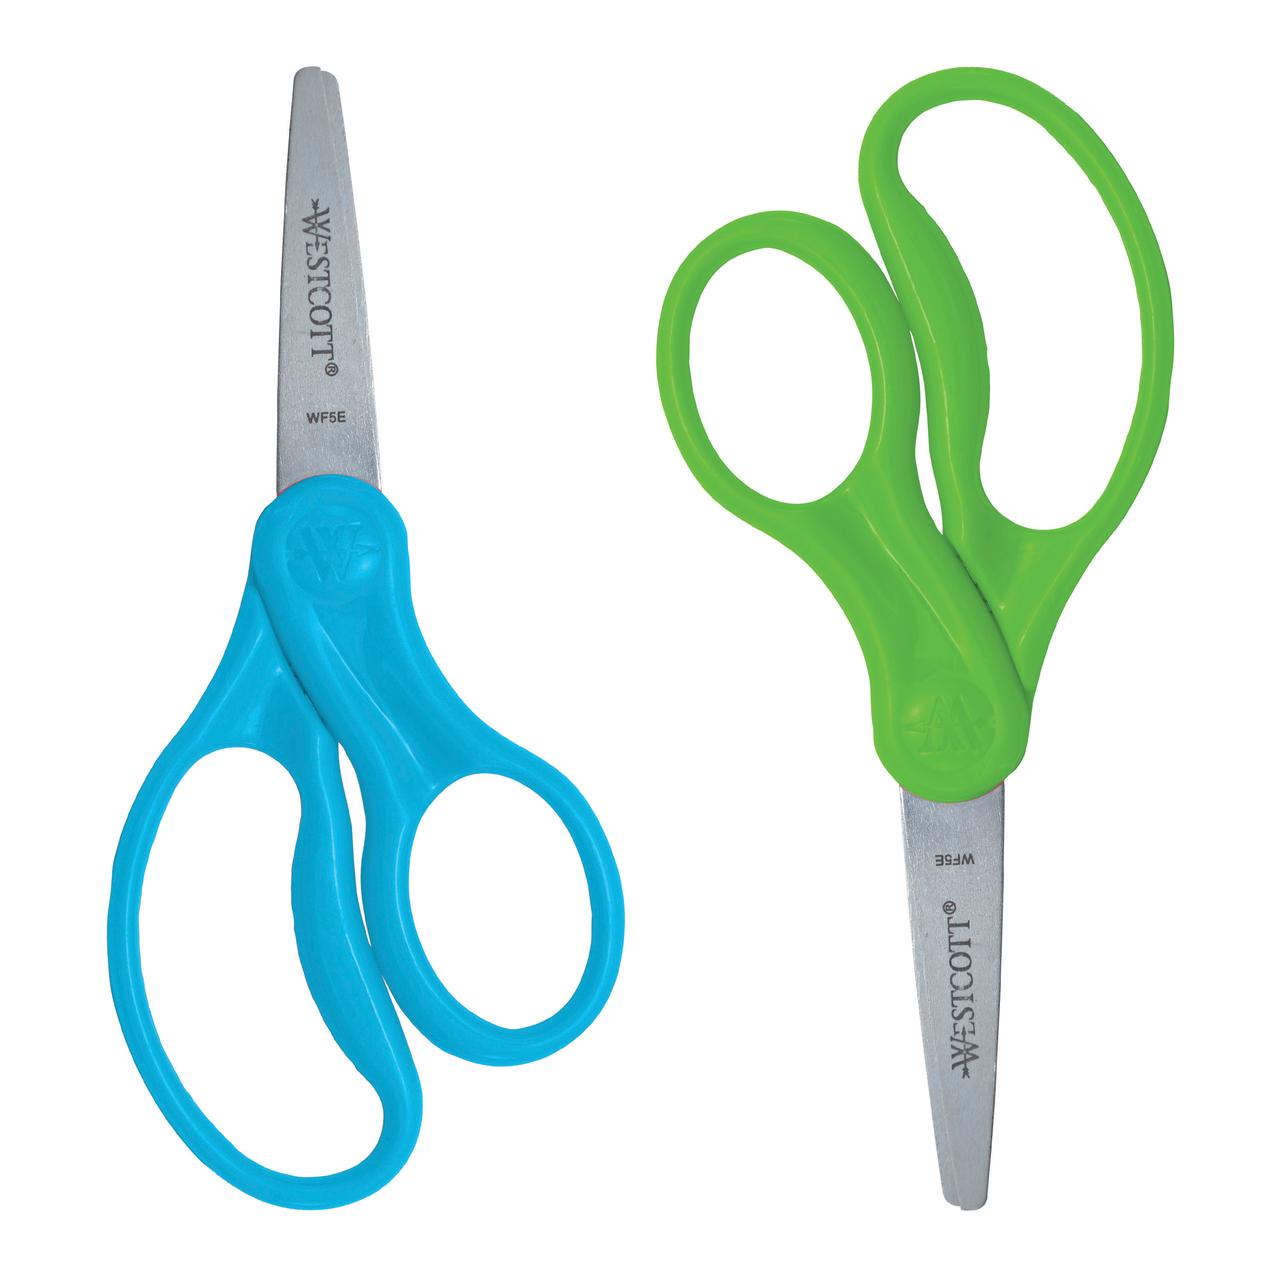 Westcott® Hard Handle Kids Value Scissors, 5", Pointed, Assorted Colors, 2 Pack - image 1 of 9